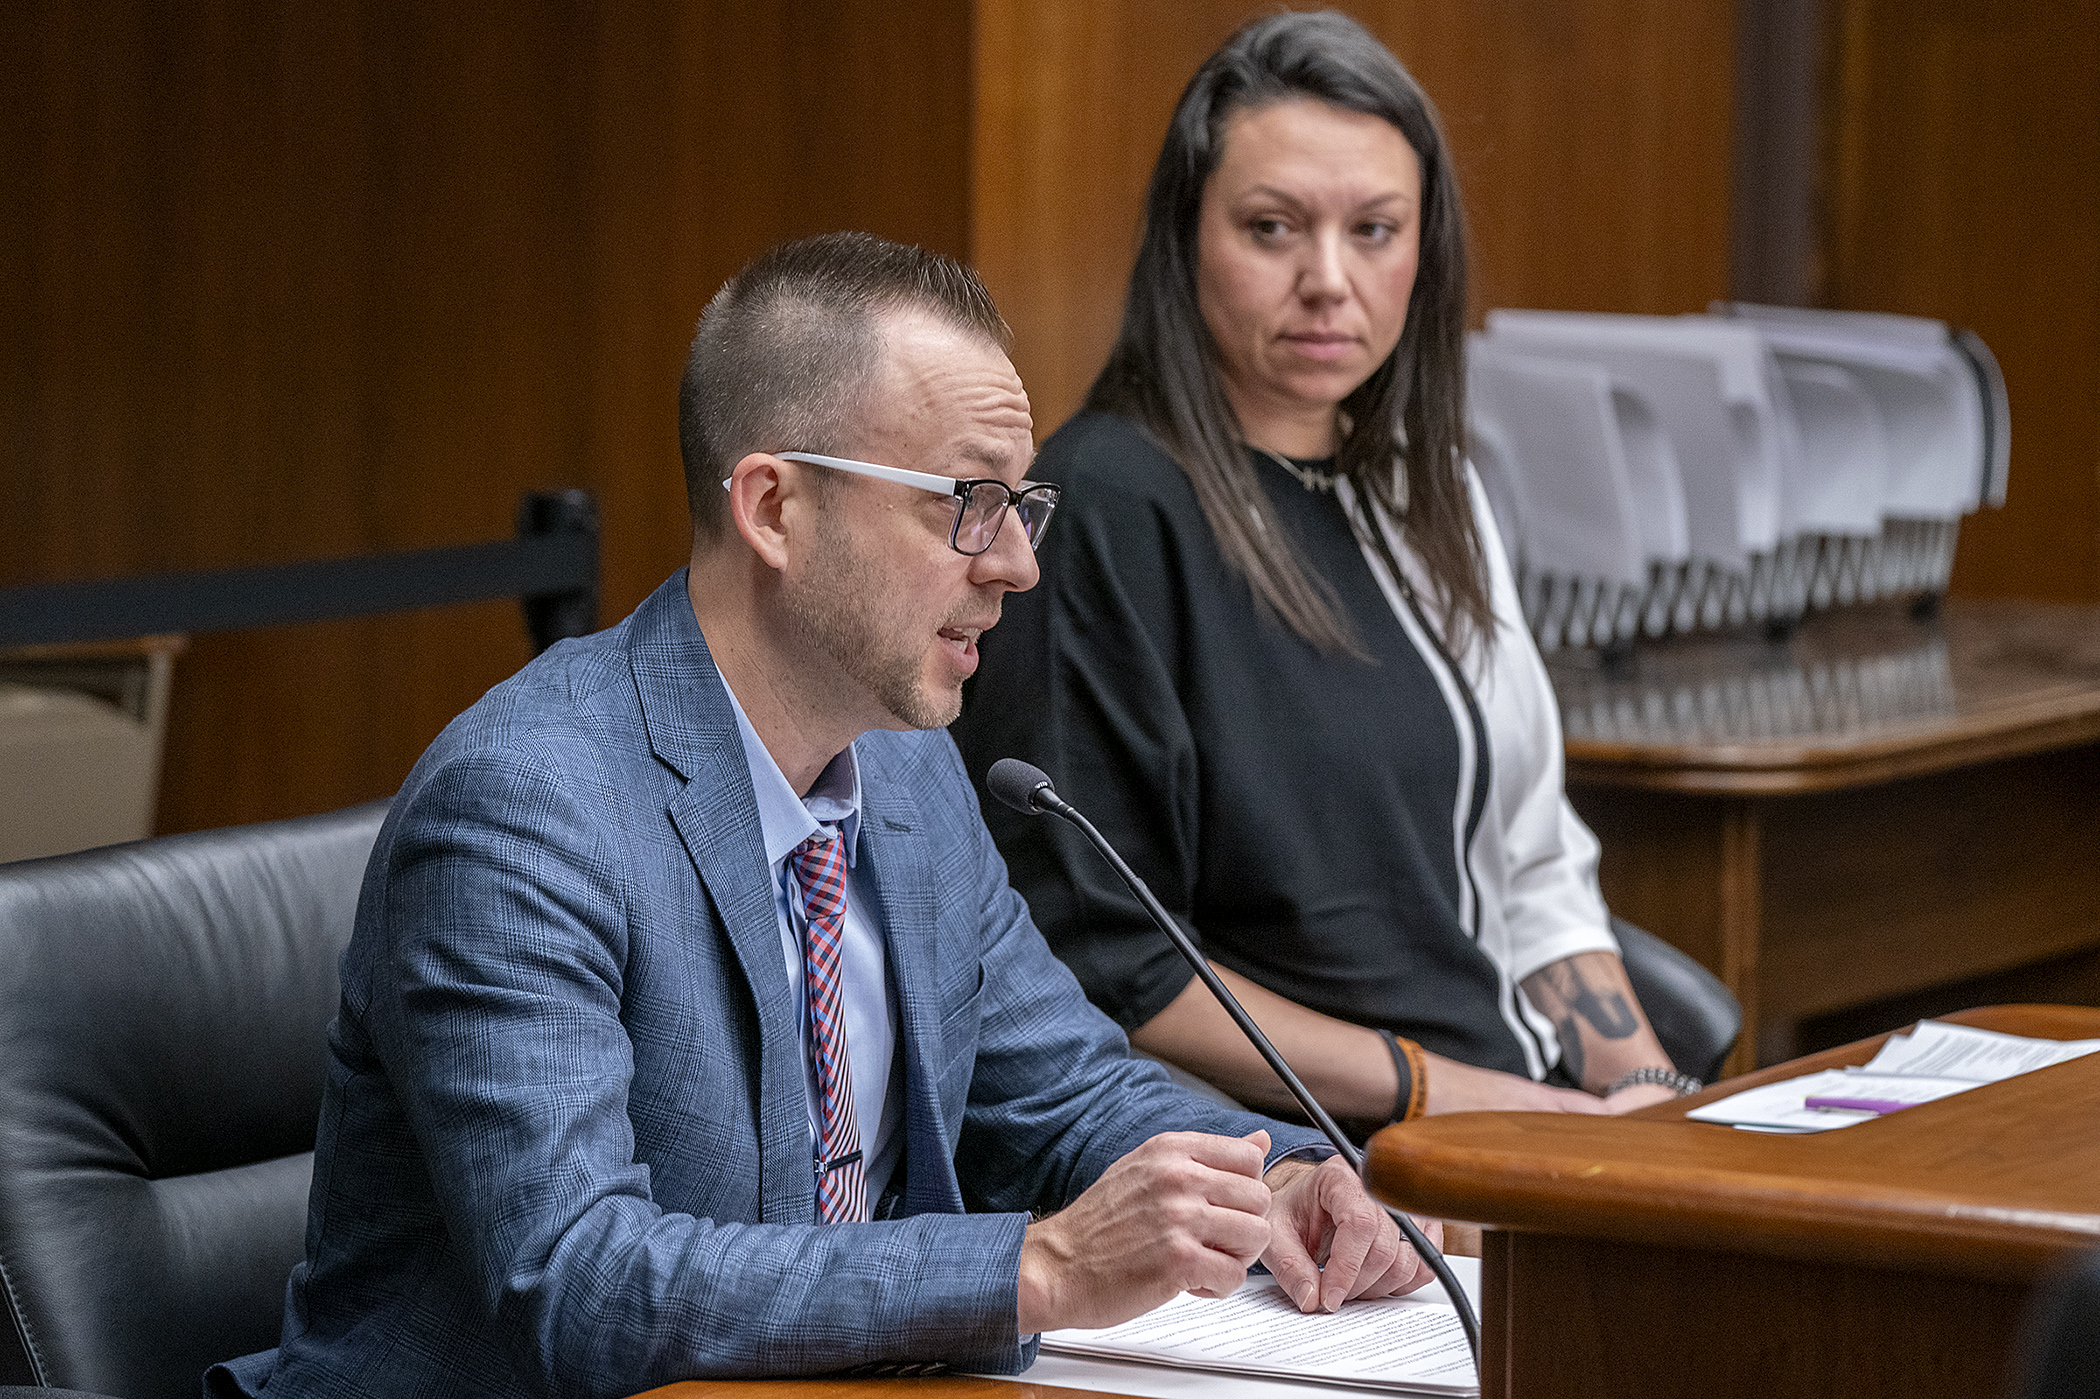 Peter Woitock, government relations specialist at Hunger Solutions Minnesota, testifies before the House Children and Families Finance and Policy Committee Feb. 20 on HF3469. Rep. Heather Keeler, right, sponsors the bill. (Photo by Michele Jokinen)